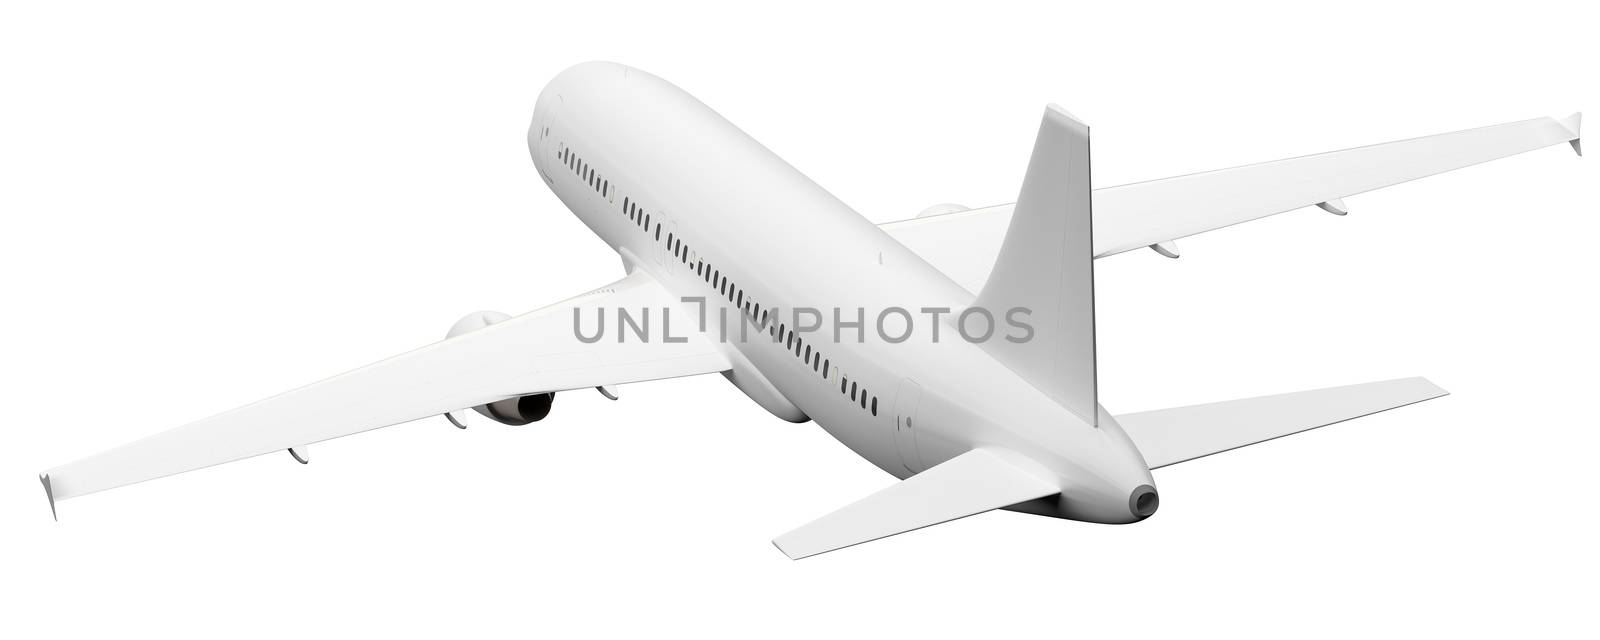 An image of a plane rear view isolated on white